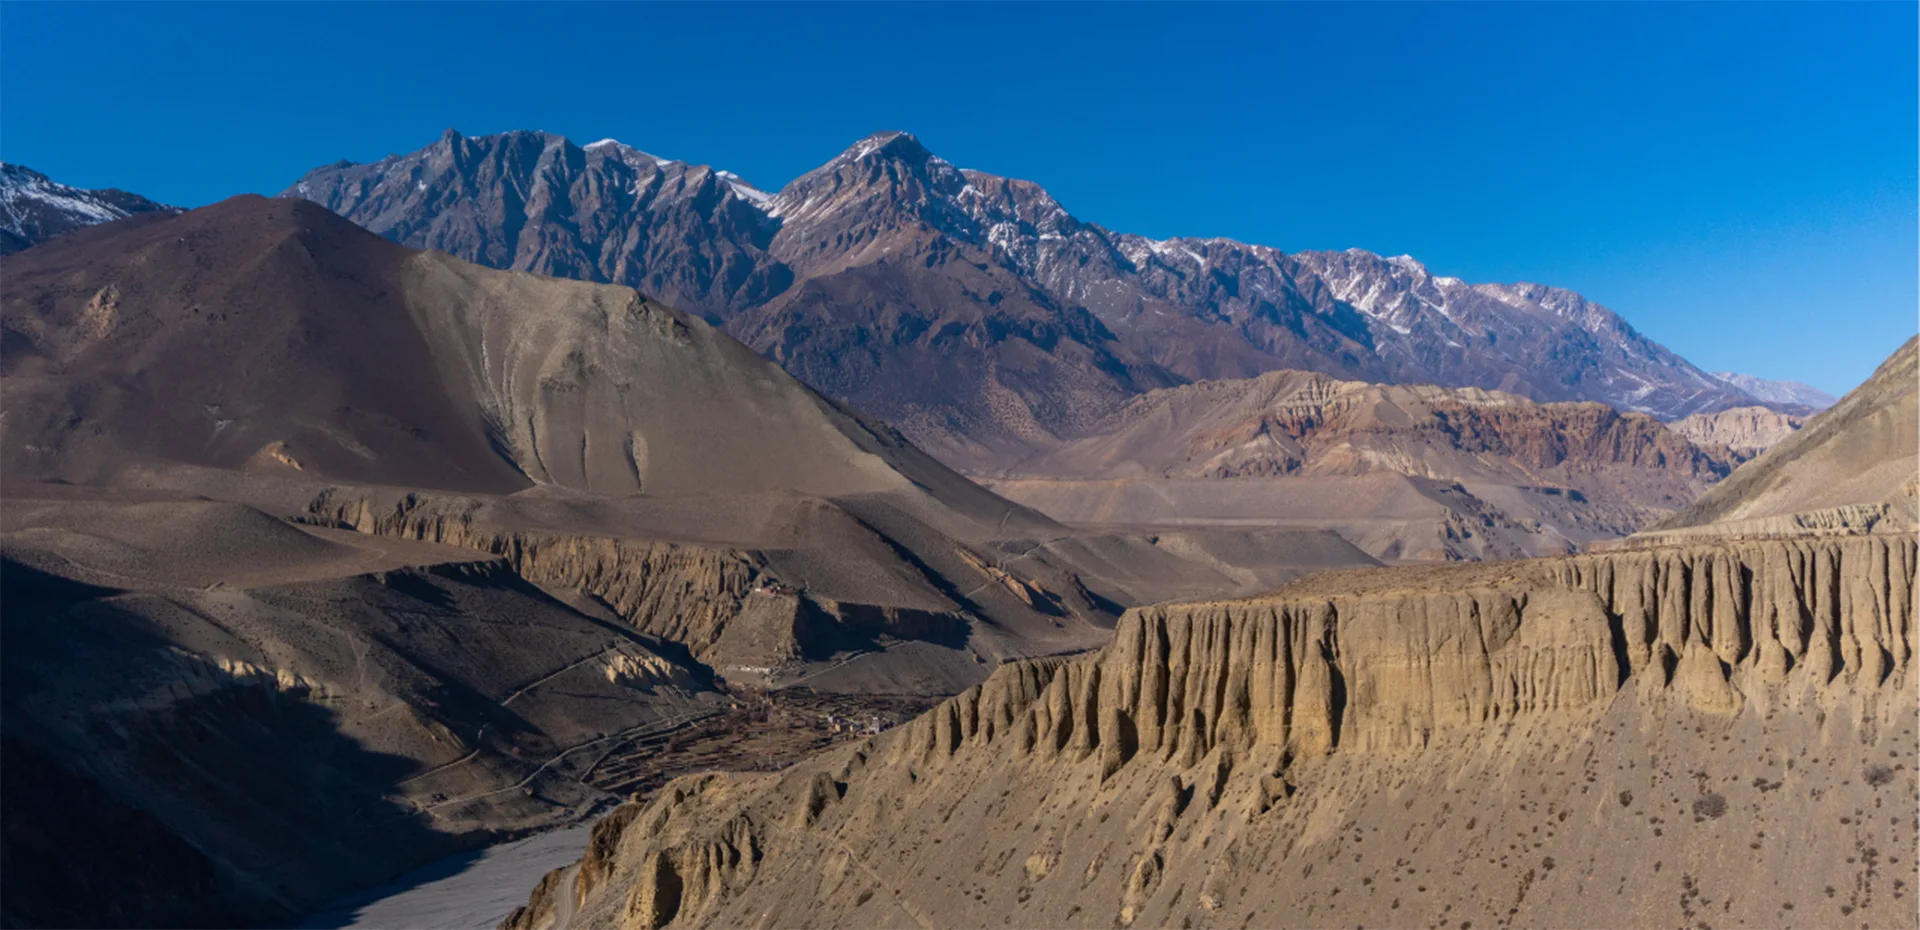 Mustang now has three new hiking trails in Nepal